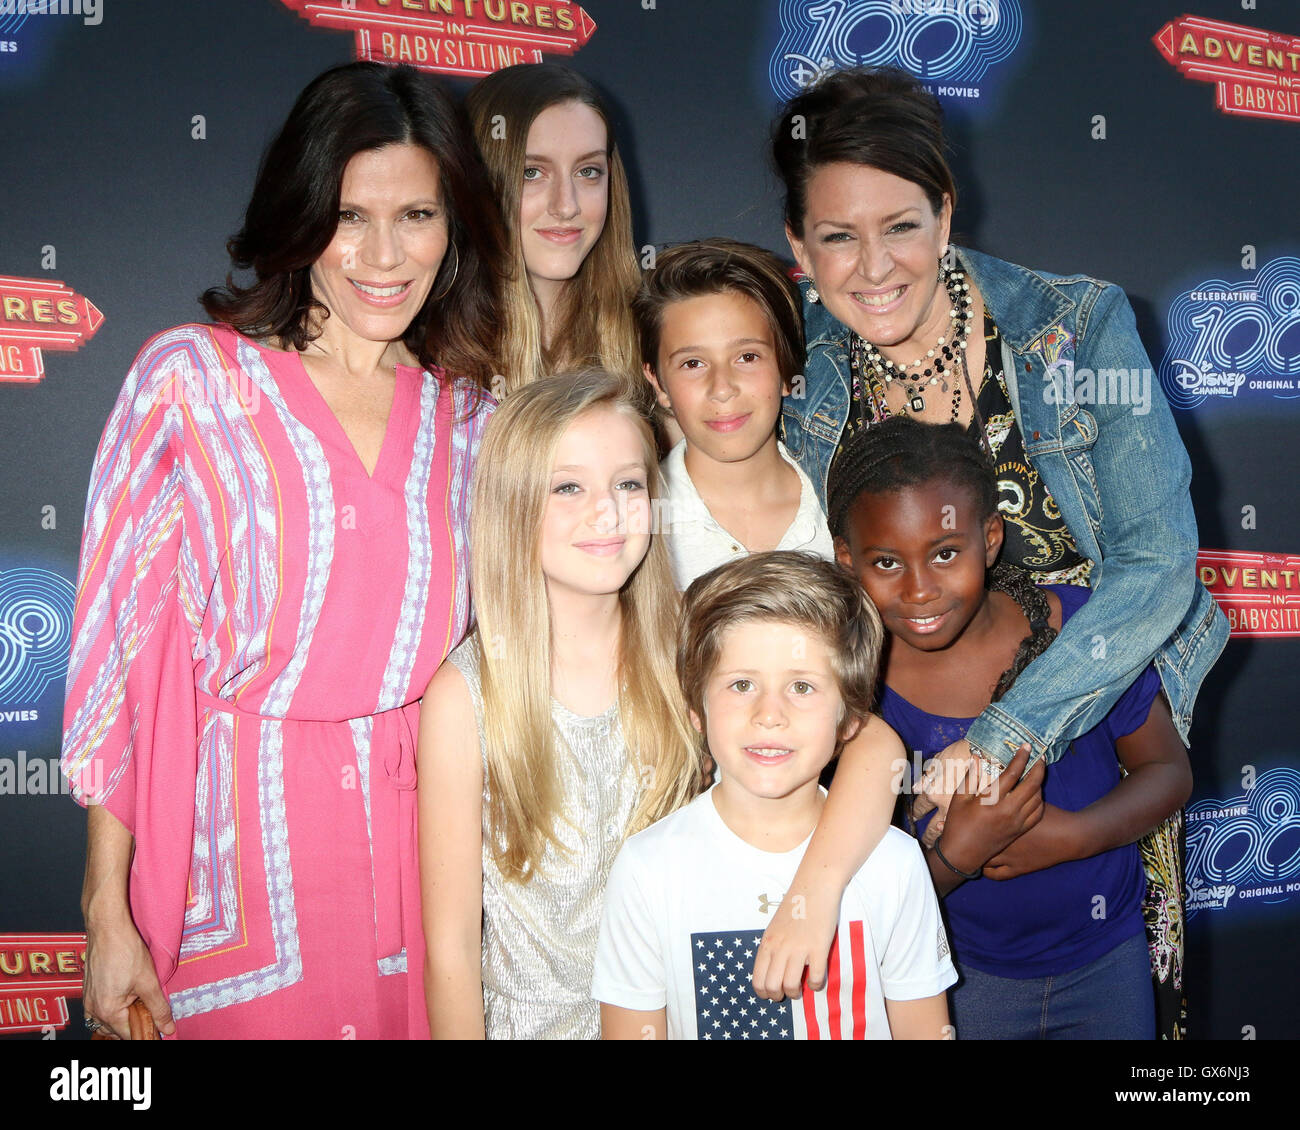 Premiere of 100th Disney Channel's Original Movie 'Adventures In Babysitting' and celebration of all DCOMS at Directors Guild Of America - Arrivals  Featuring: Tricia Leigh Fisher, True Harlow Fisher-Duddy, Skylar Grace Fisher-Duddy, Wylder Thames, Holden Stock Photo